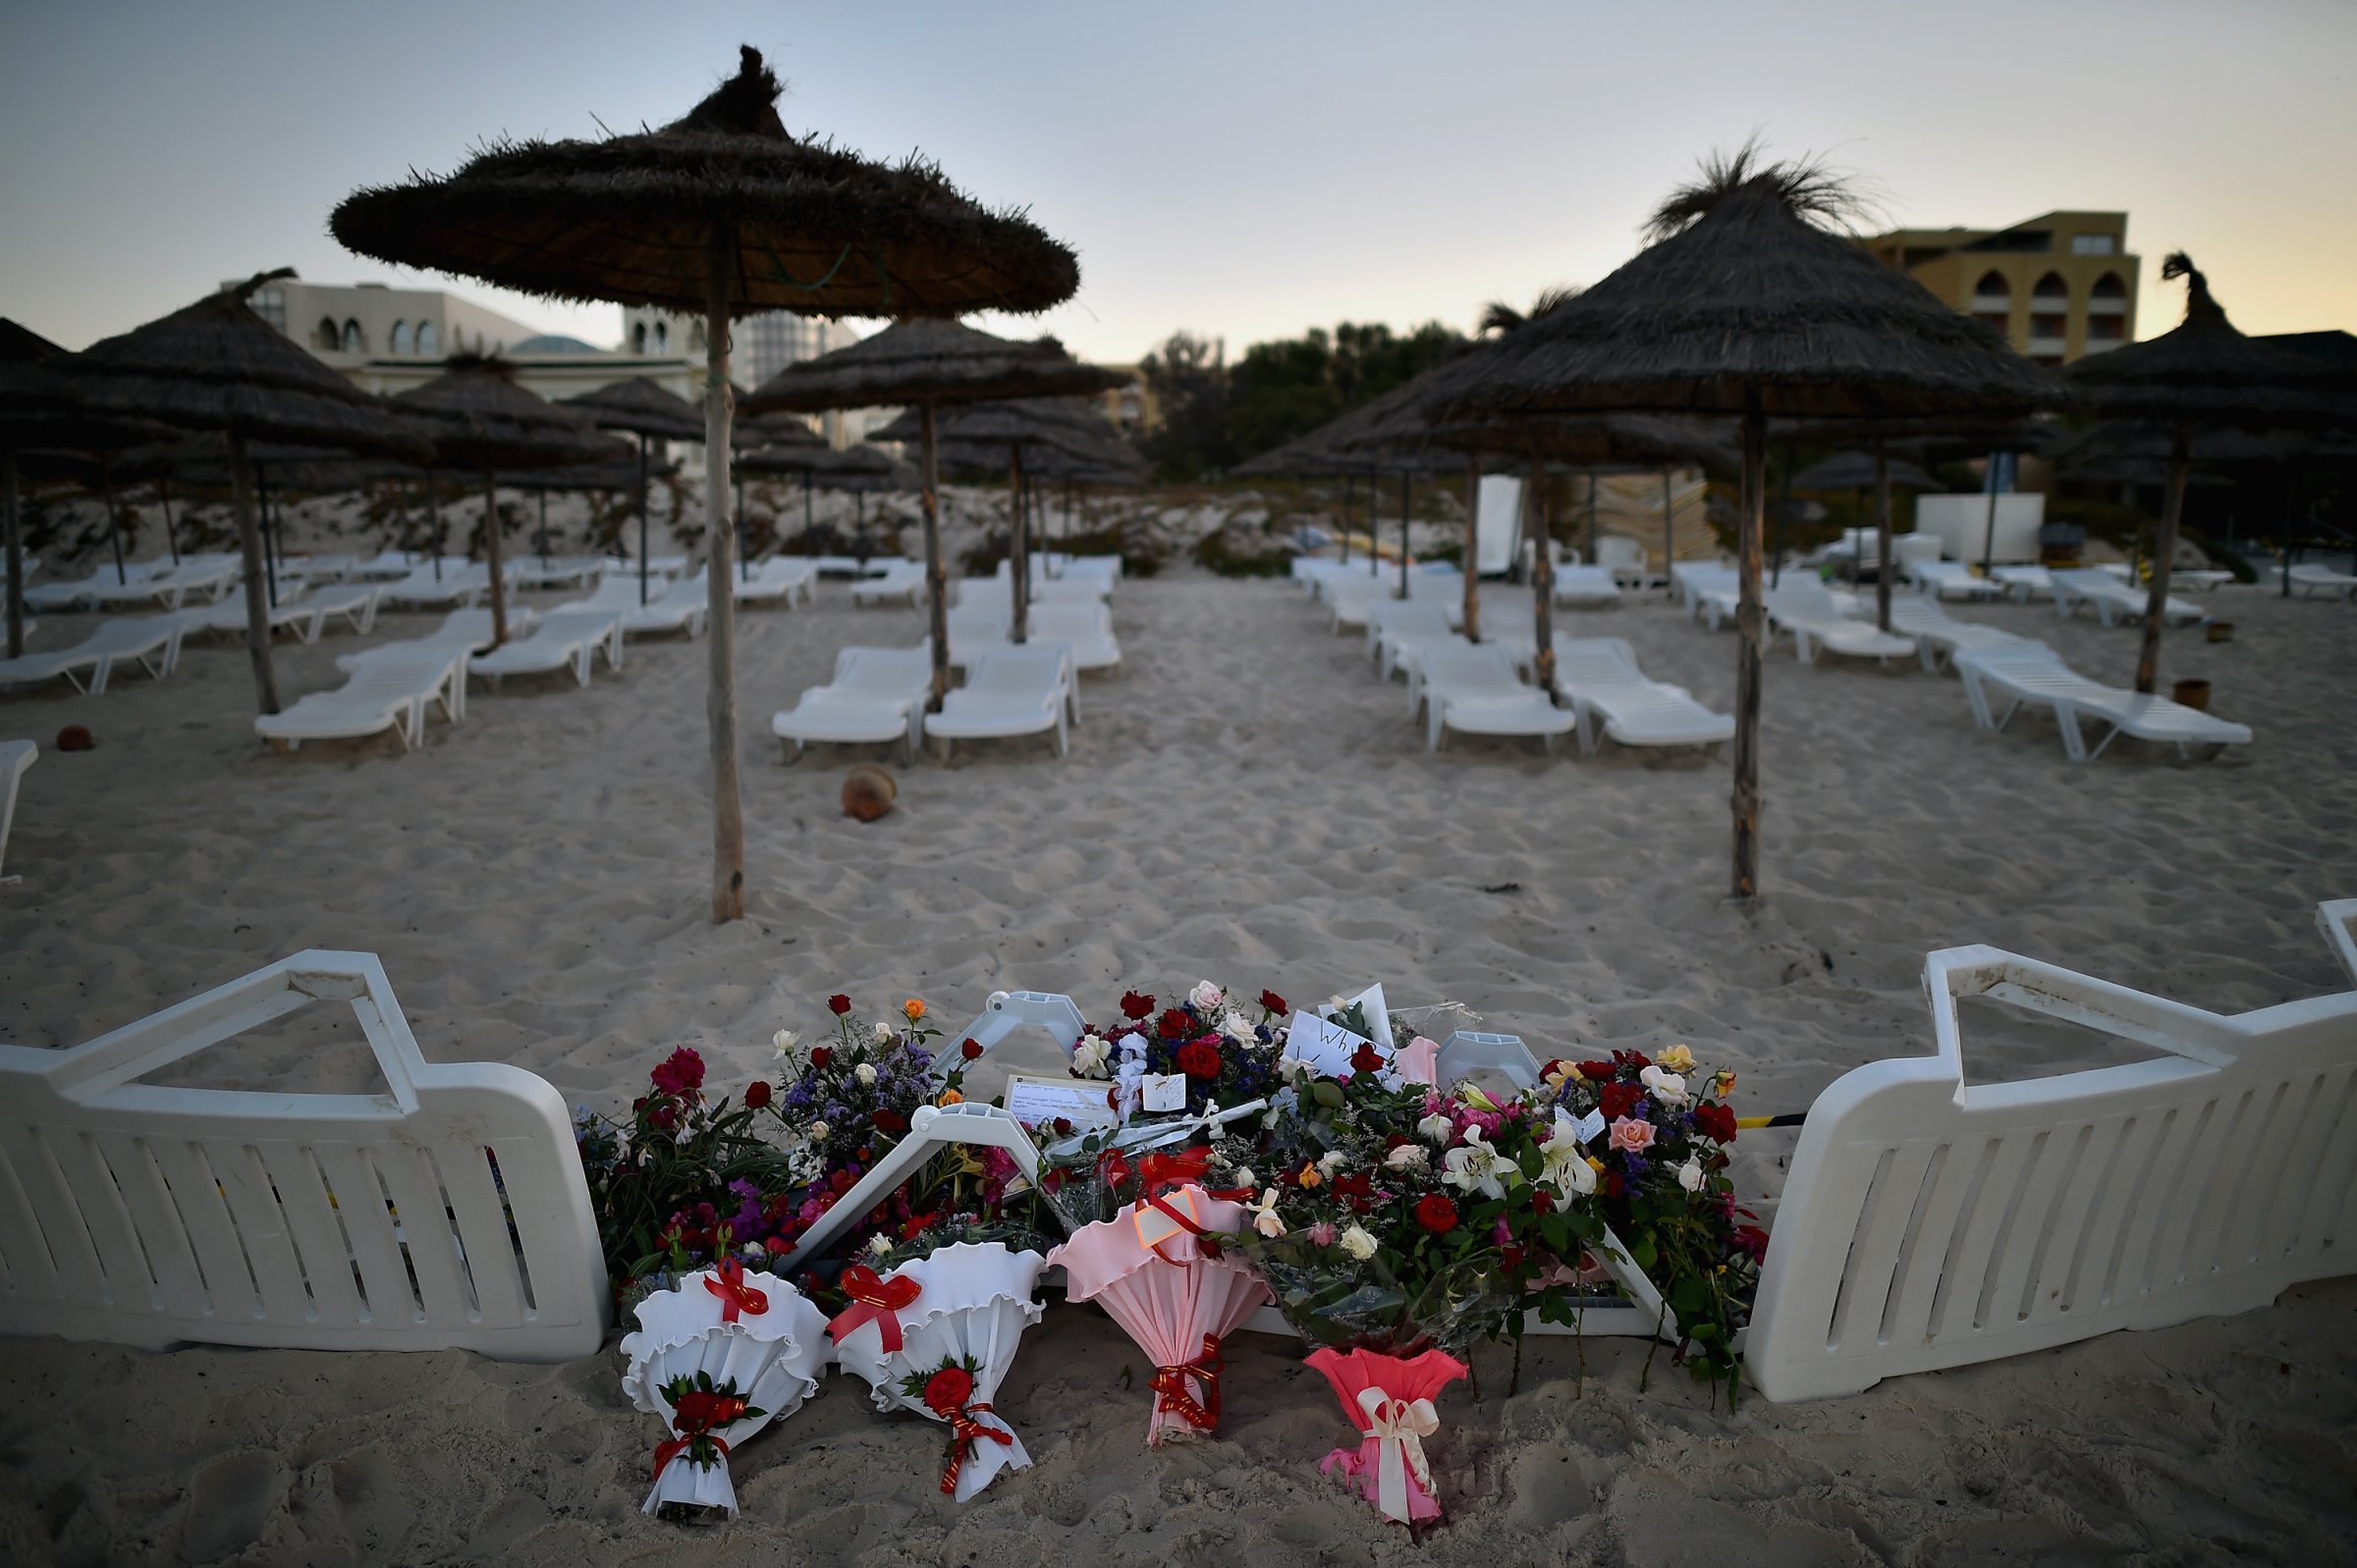 Flowers are placed at the beach next to the Imperial Marhaba Hotel where 38 people were killed yesterday in a terrorist attack on June 27, 2015 in Souuse, Tunisia.